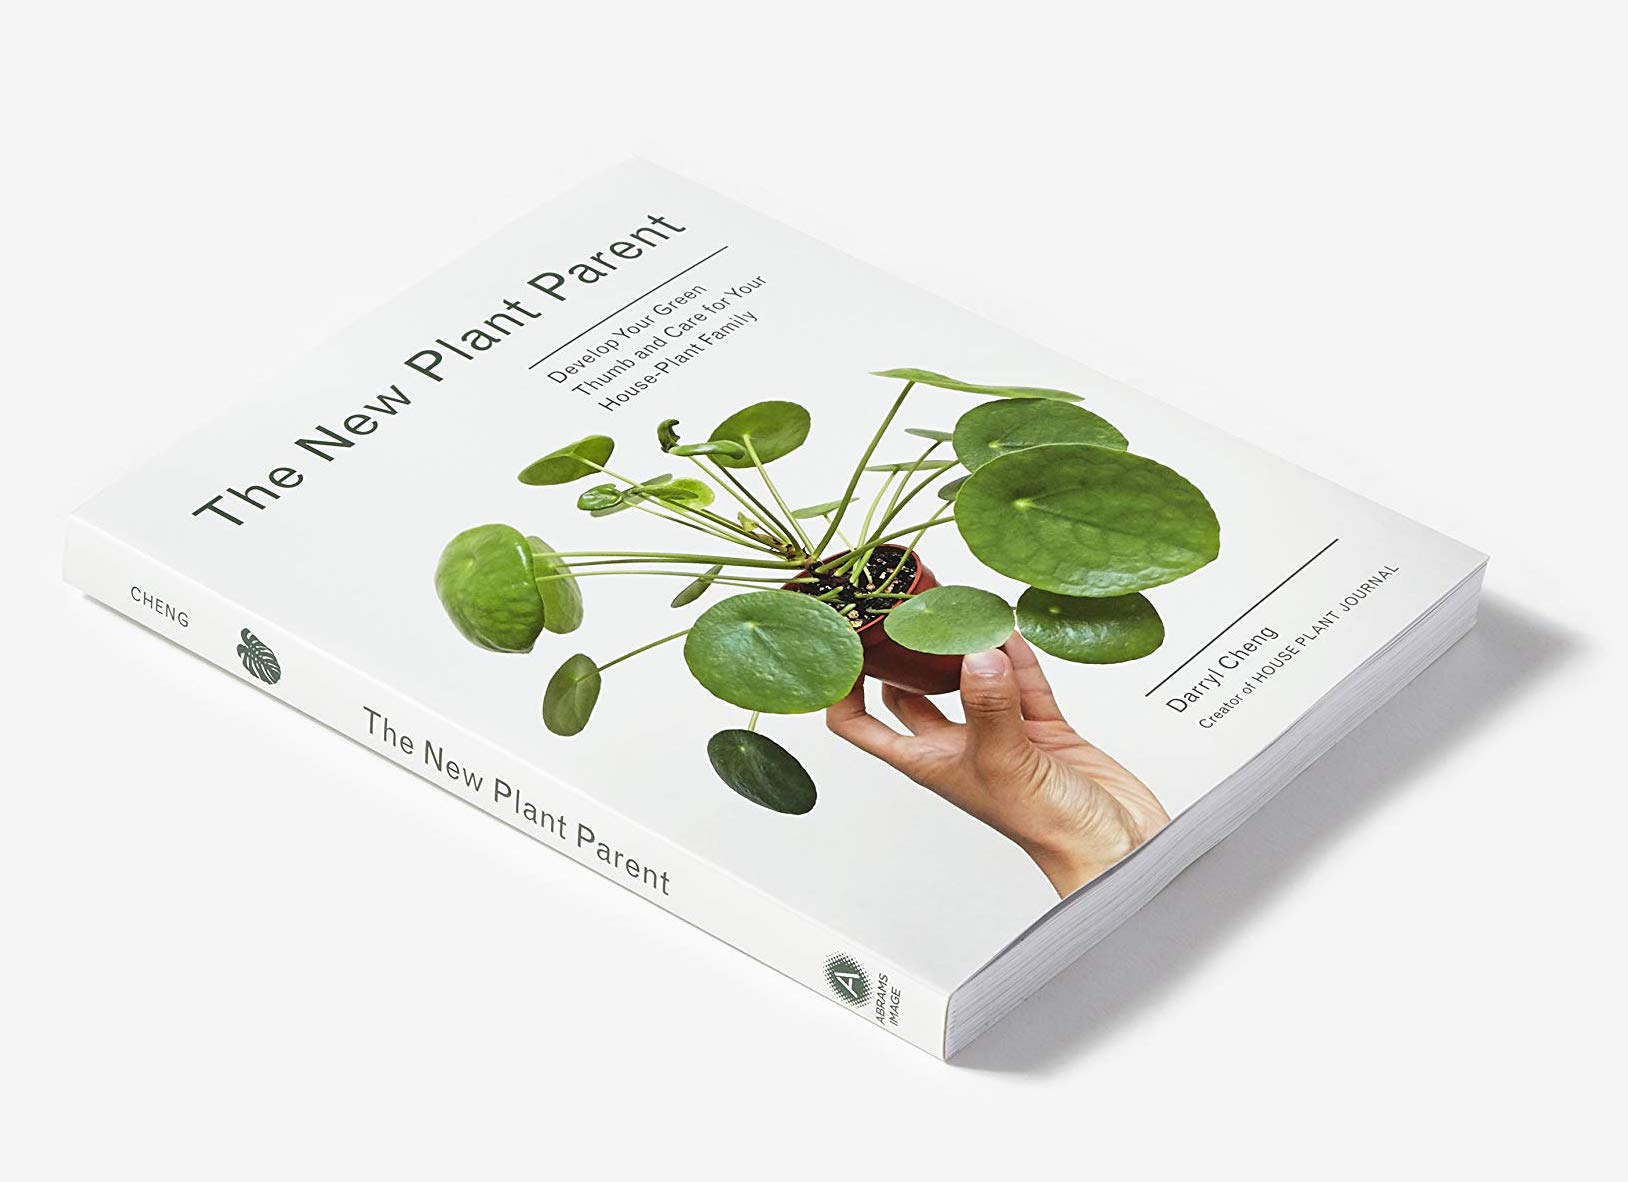 Photo of a book titled " The New Plant Parent"